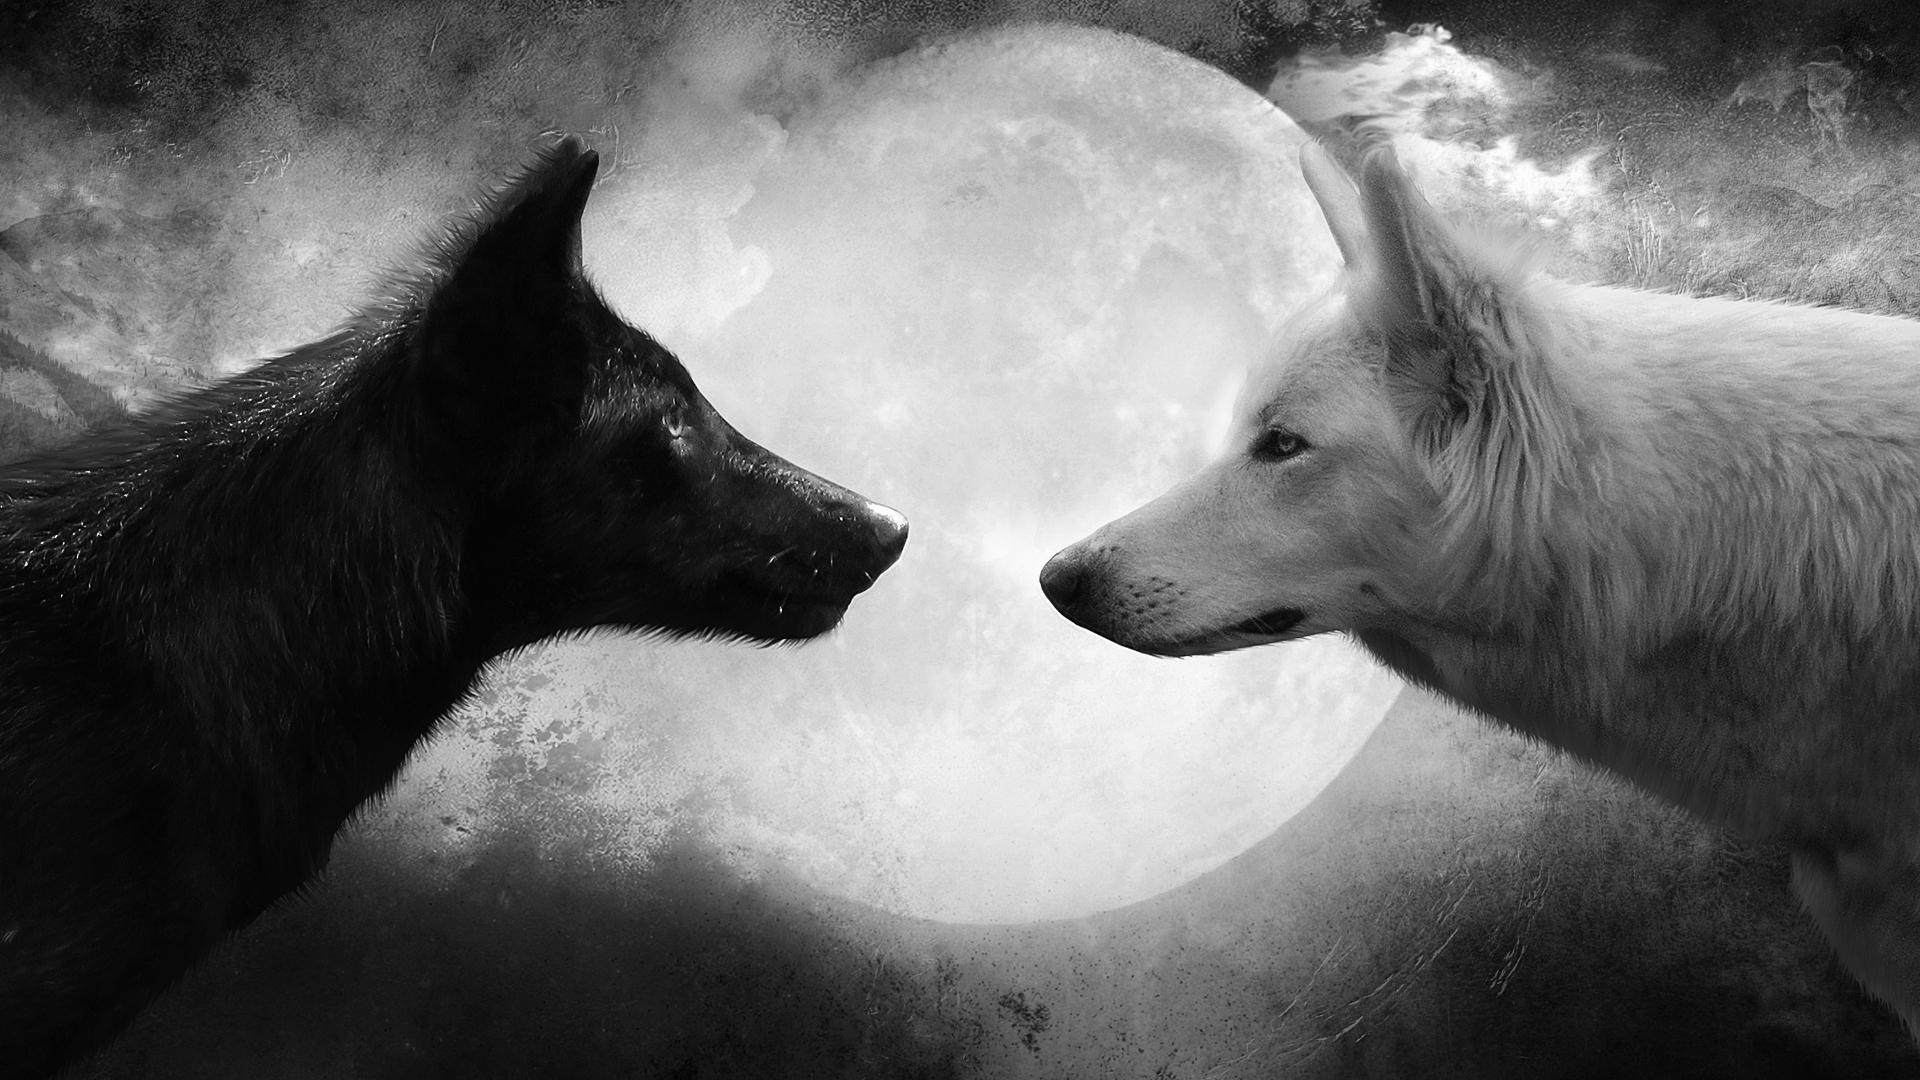 HD wallpaper, Moon, White, Wolf, Grayscale Photo Of Two Wolves, Black, Animal